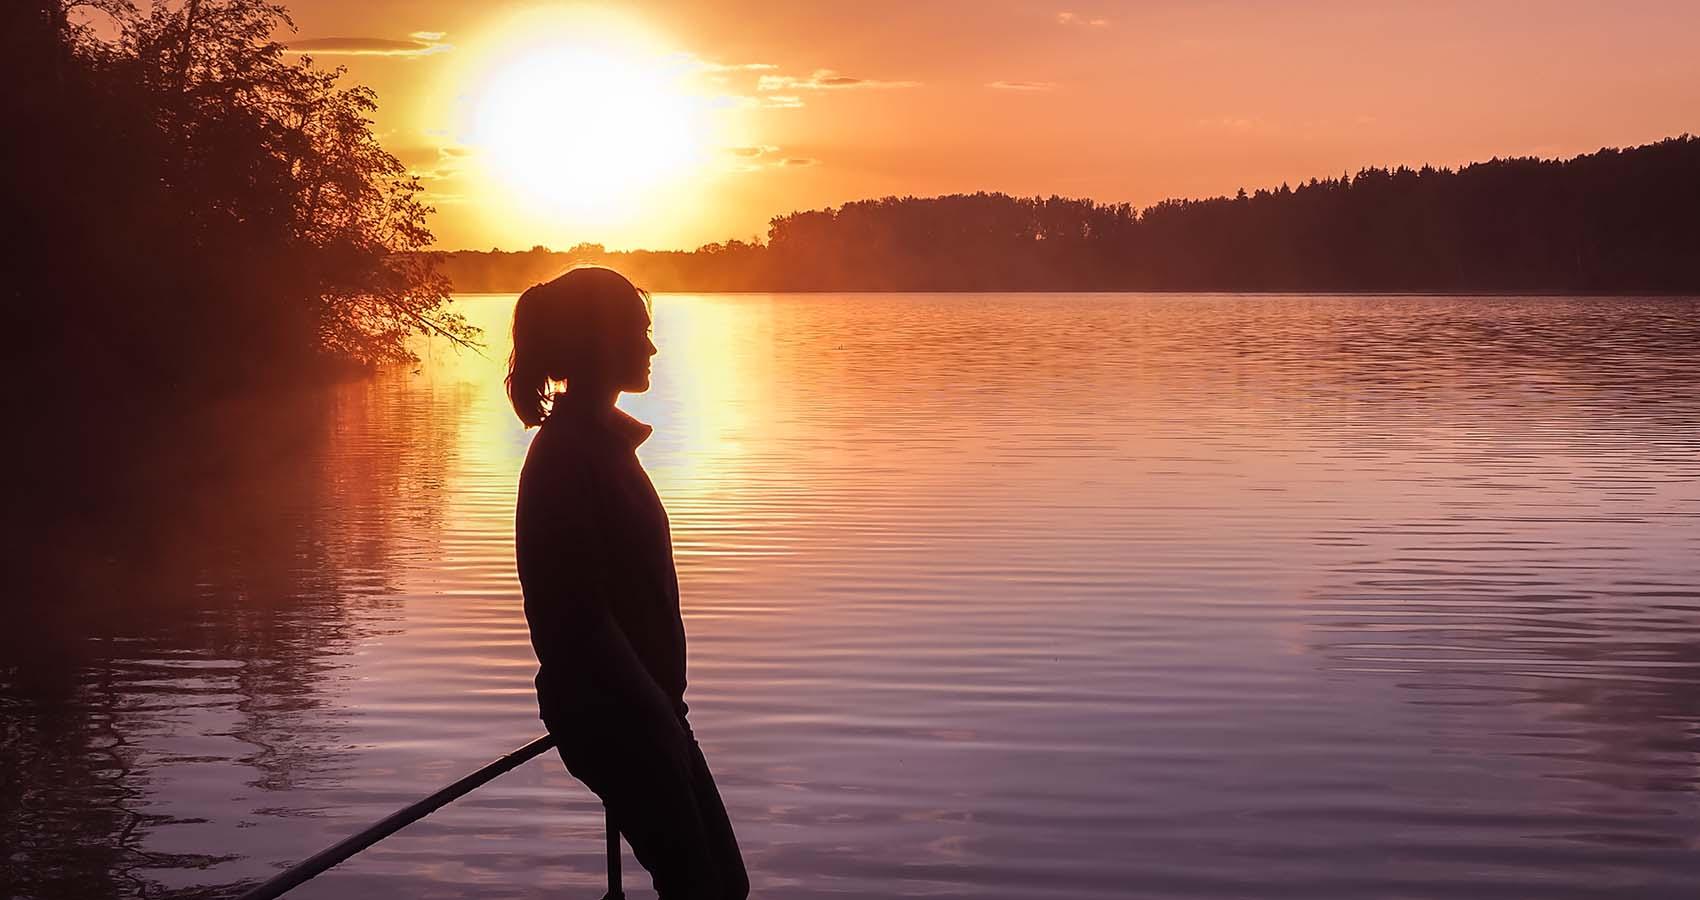 Young teenager overlooking lake at sunset